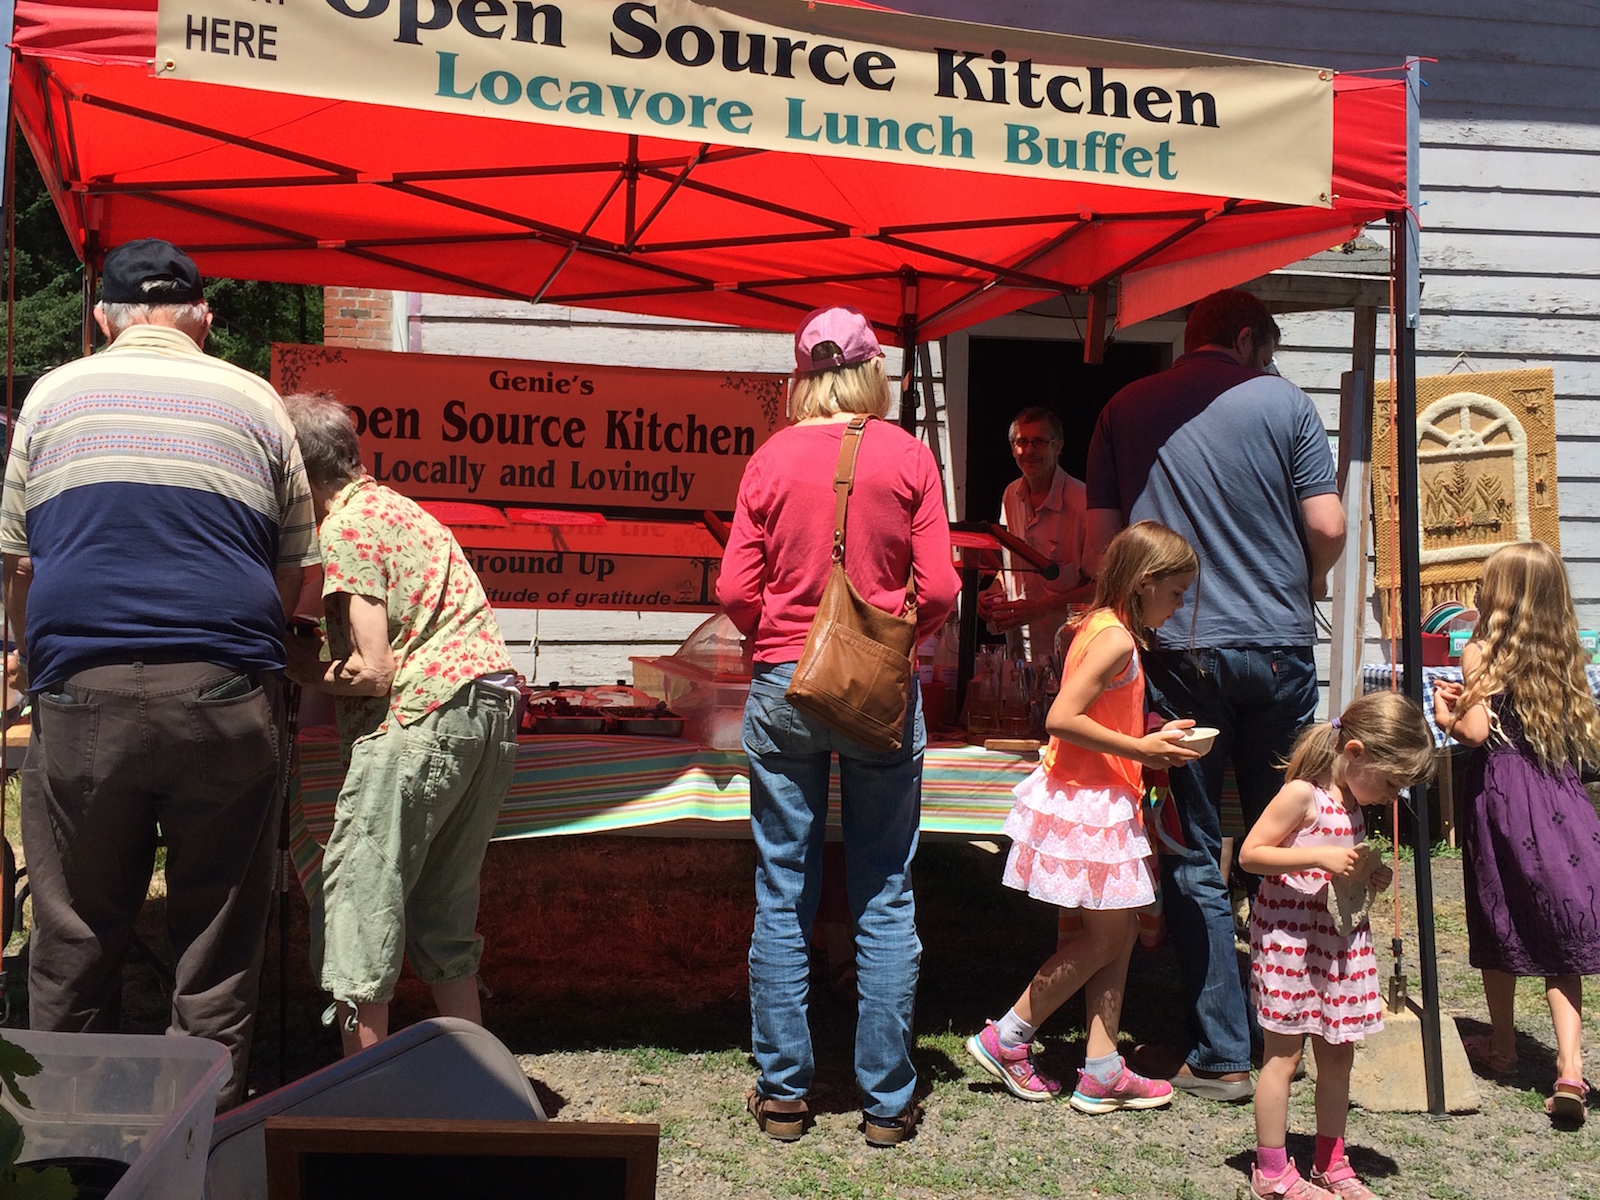 Delicious Locavore Lunch every Saturday at the Spencer Creek Growers Market